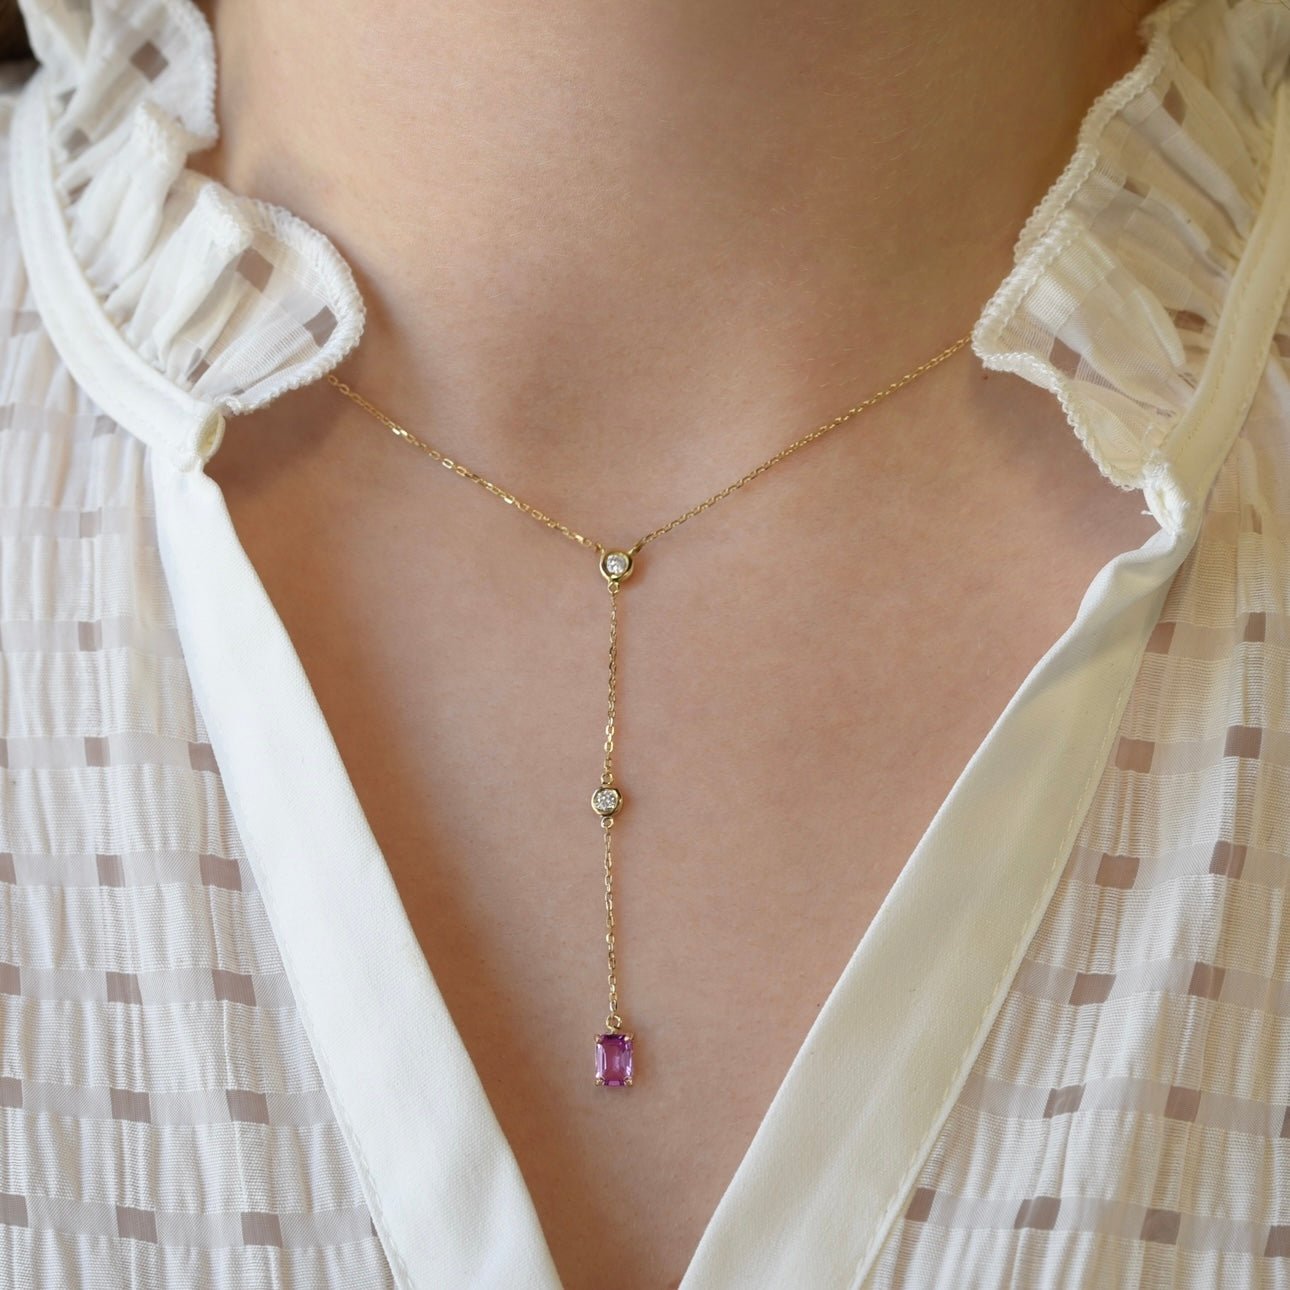 Electra Necklace in Diamond and Pink Sapphire - 18k Gold - Ly